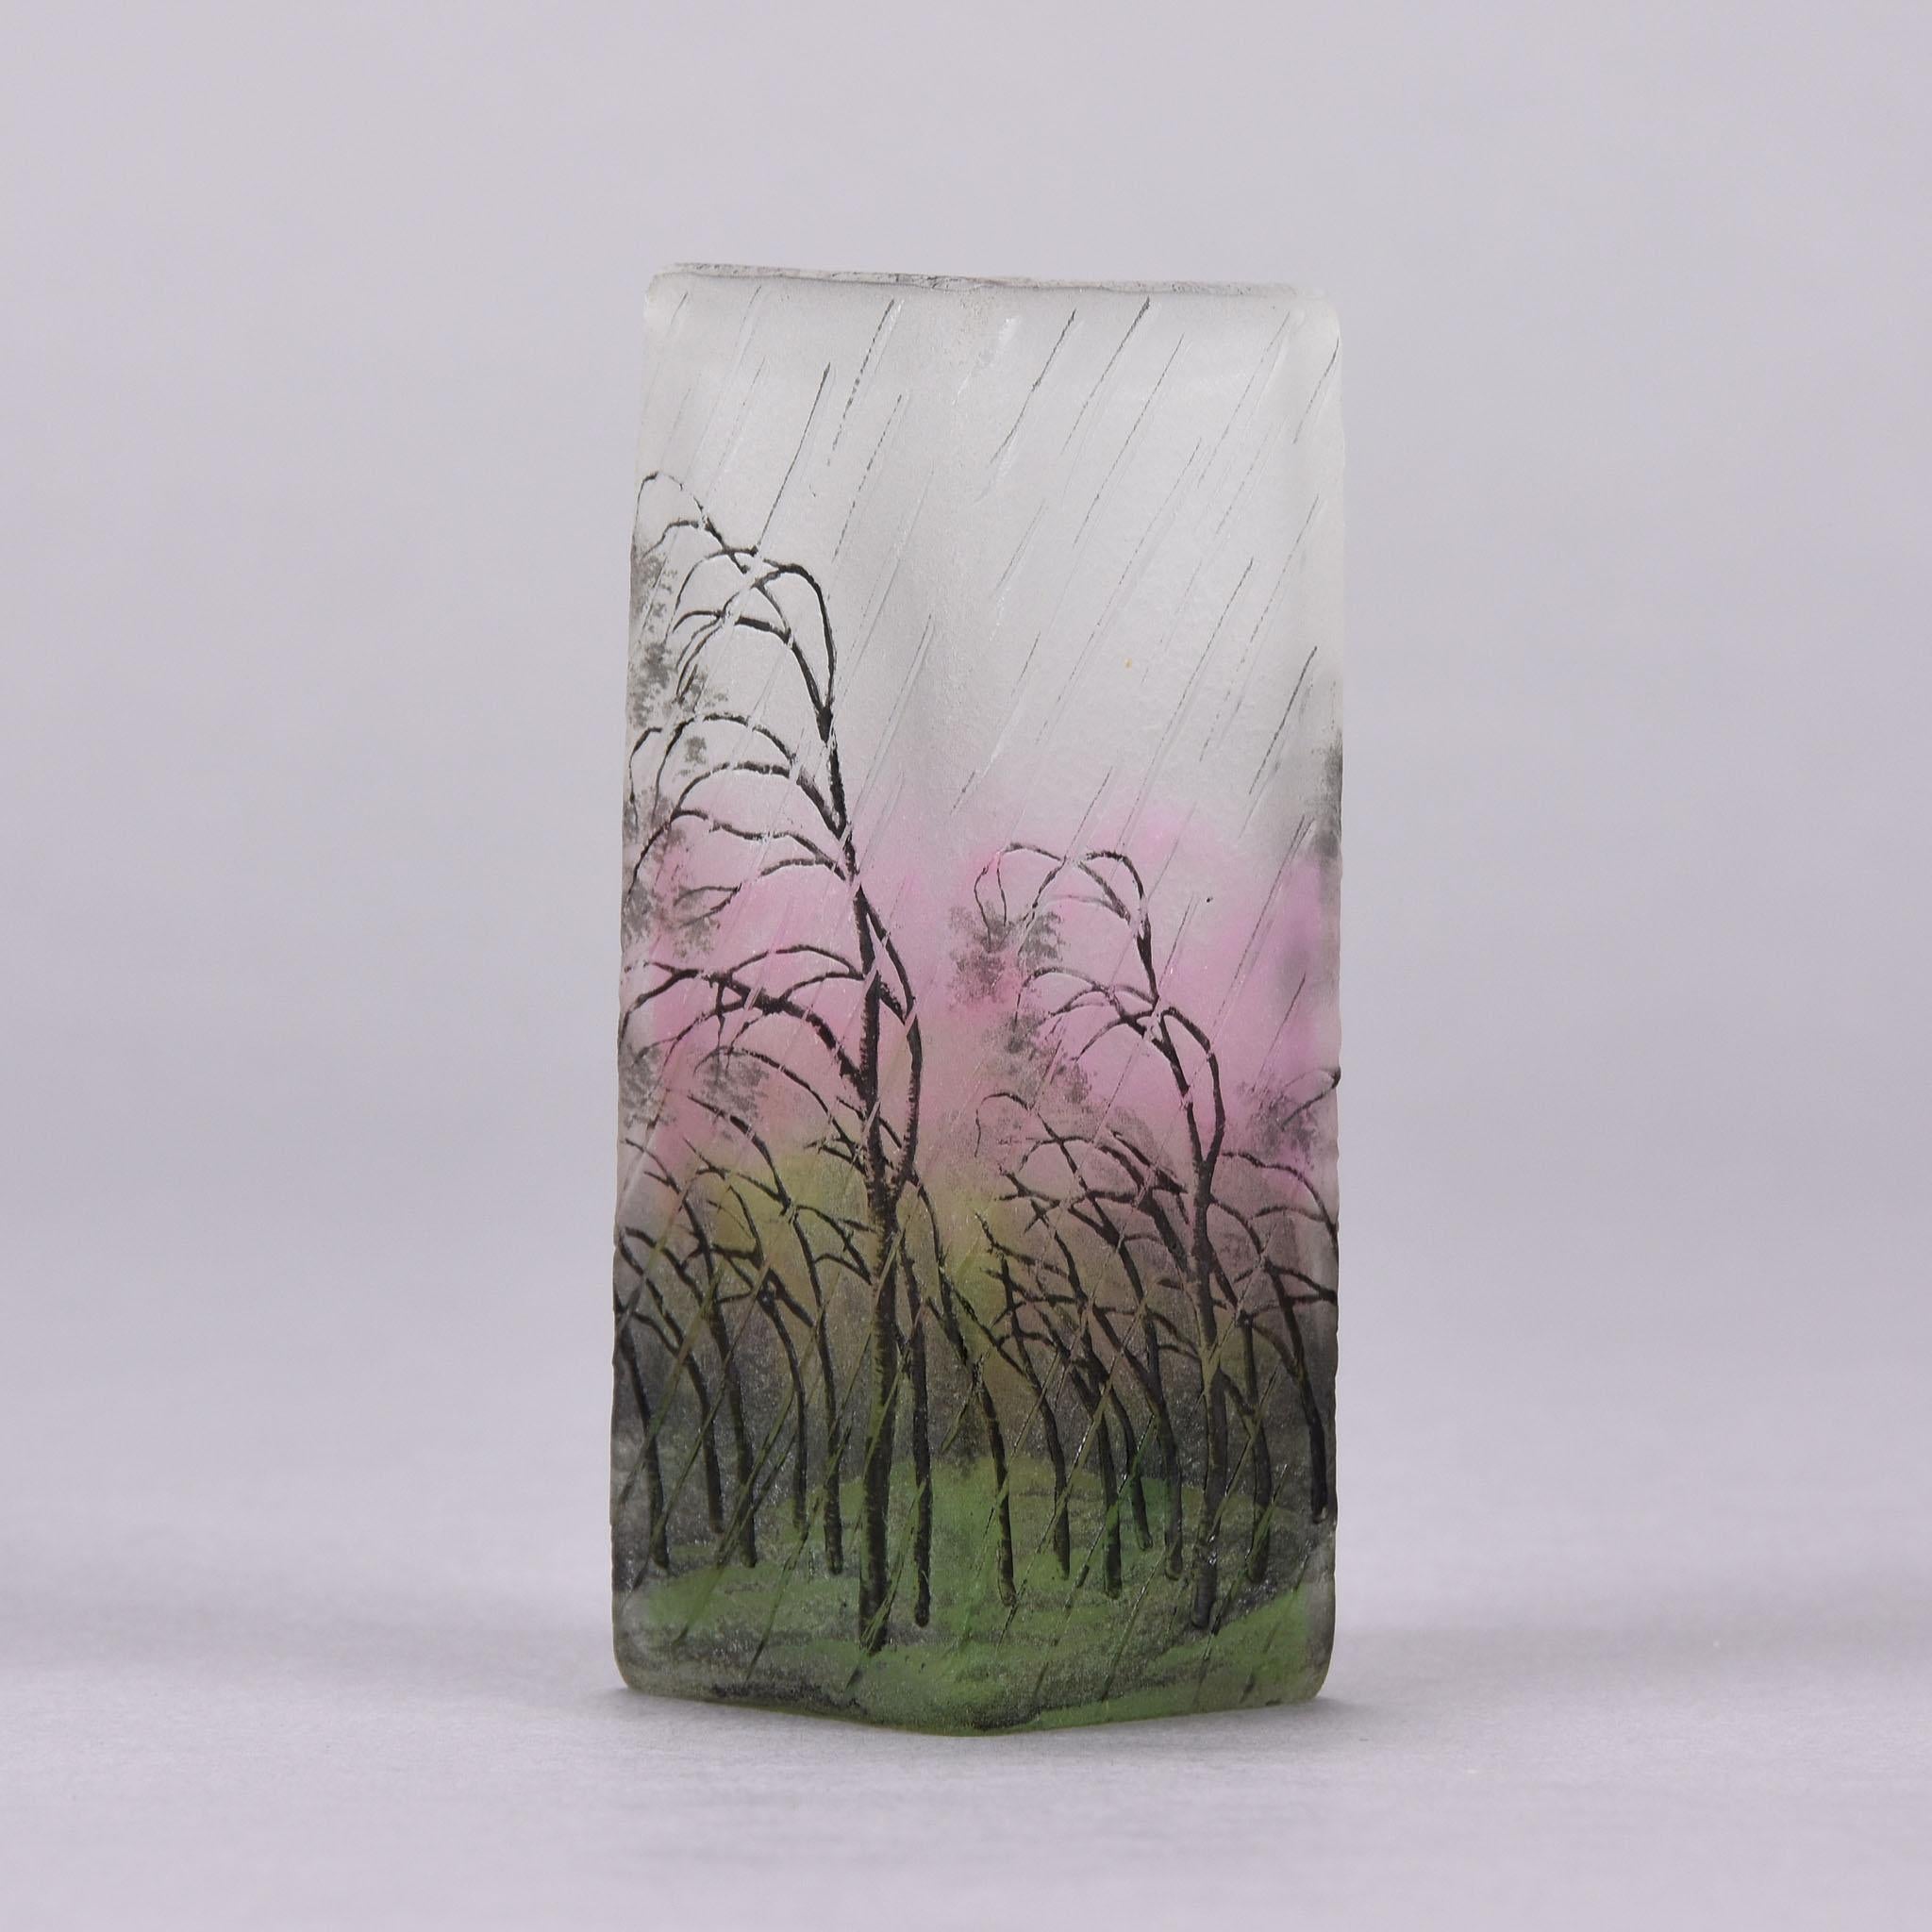 A wonderful cameo glass vase etched and enameled with silver birch trees bent over in a rain-swept landscape. The design heightened with deep pink and green colors interwoven on the surface to give a dramatic depth of field. Signed Daum Nancy and